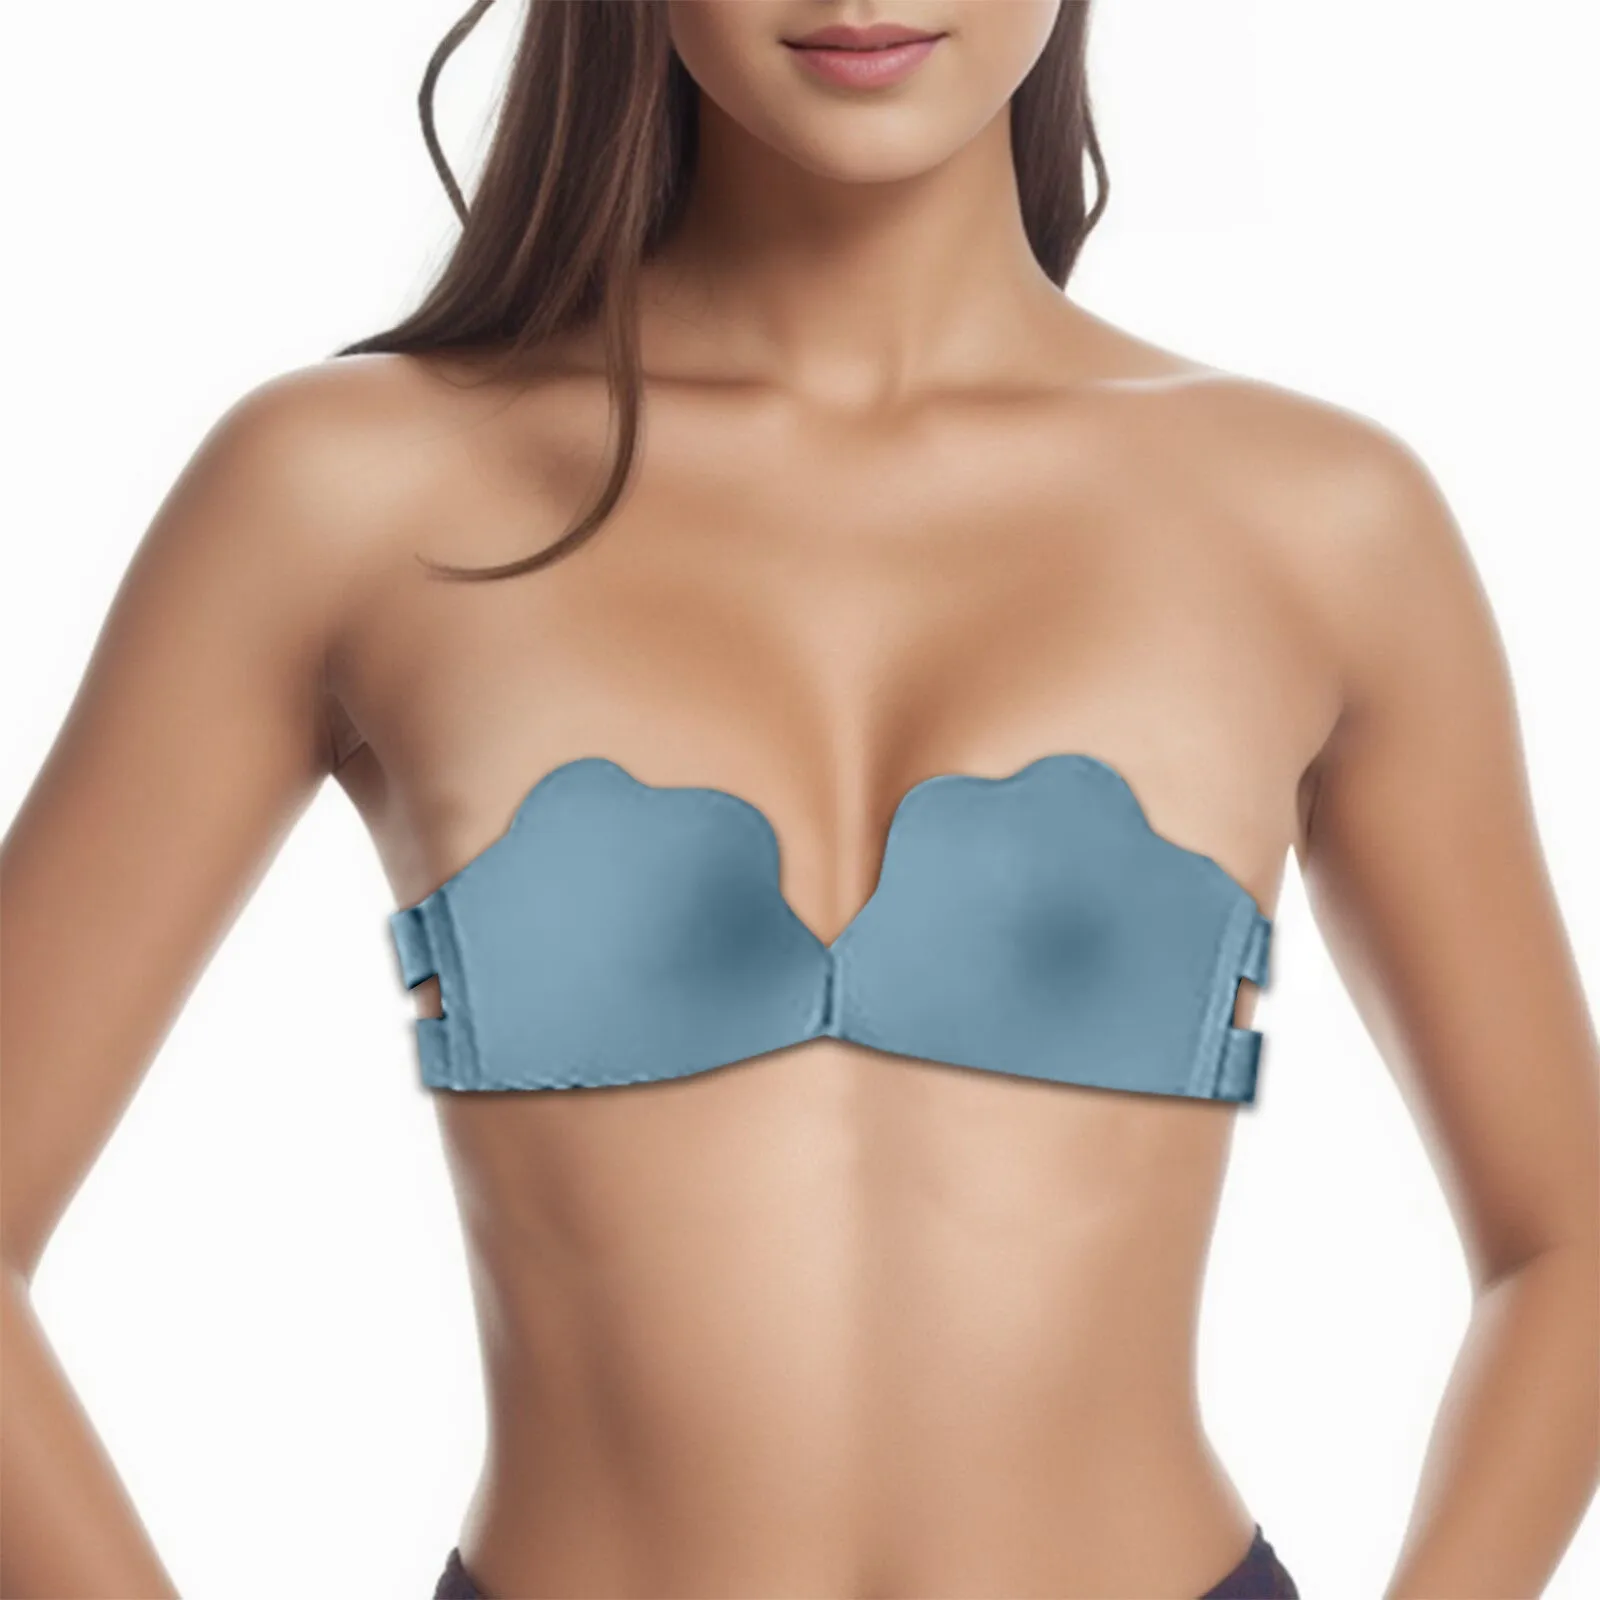 Other Panties Seamless Bras For Women Underwear Sexy Brassiere Active Push  Up Bra Strapless Female Top BH Comfort Lingerie Wire Free Bralette W221010  From Us_arkansas, $5.46